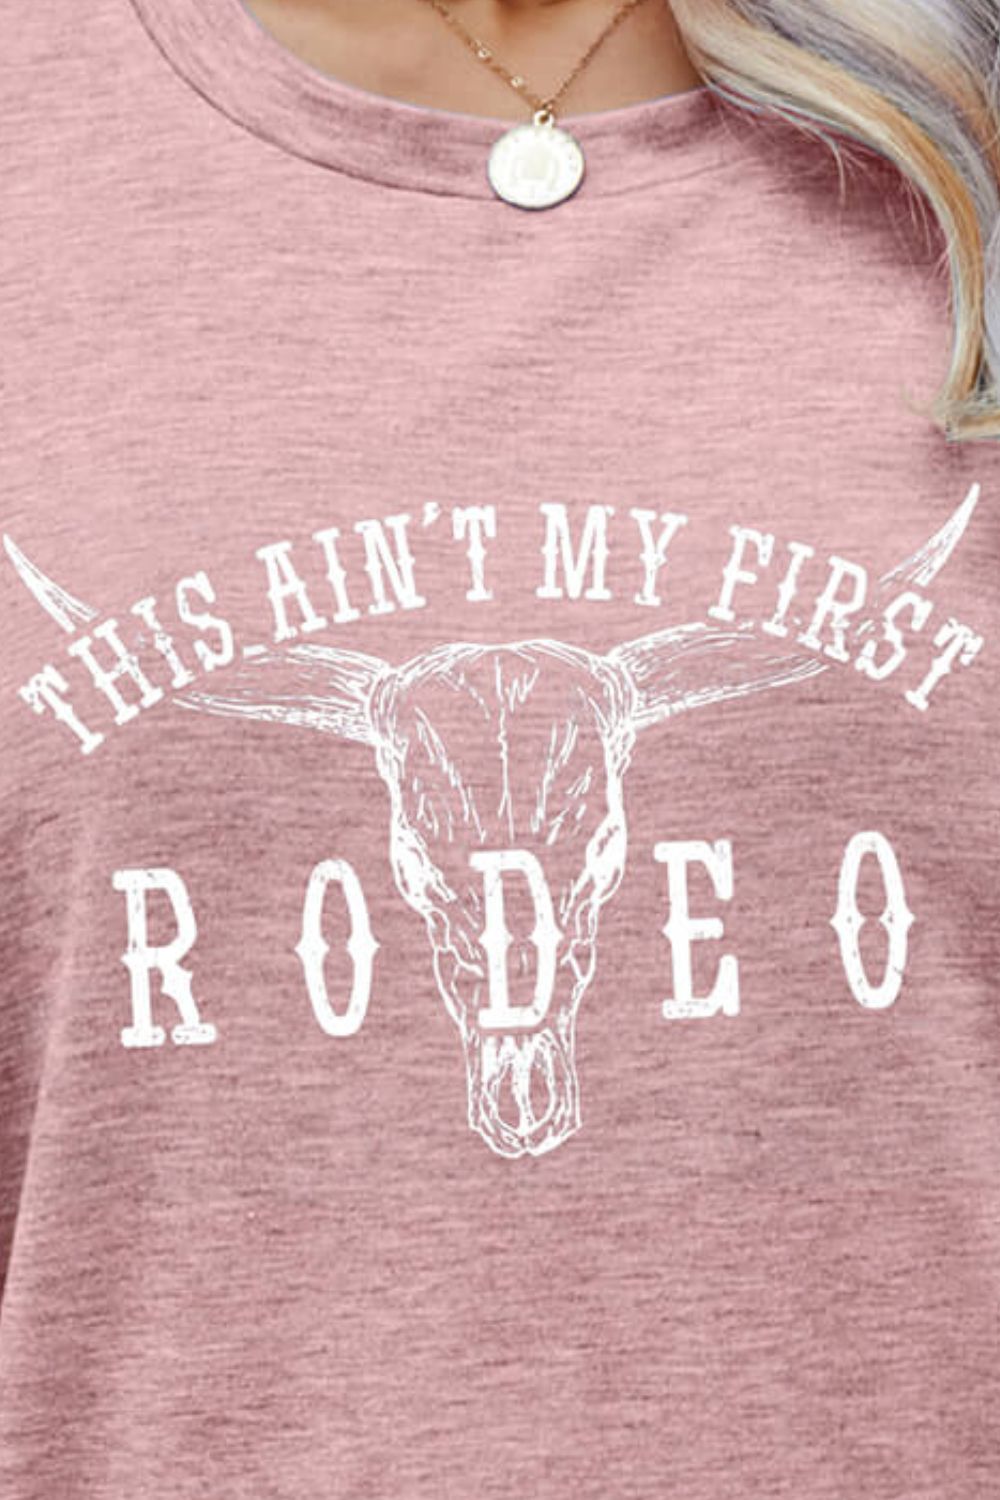 THIS AIN'T MY FIRST RODEO Tee Shirt Branding Iron Western Wear